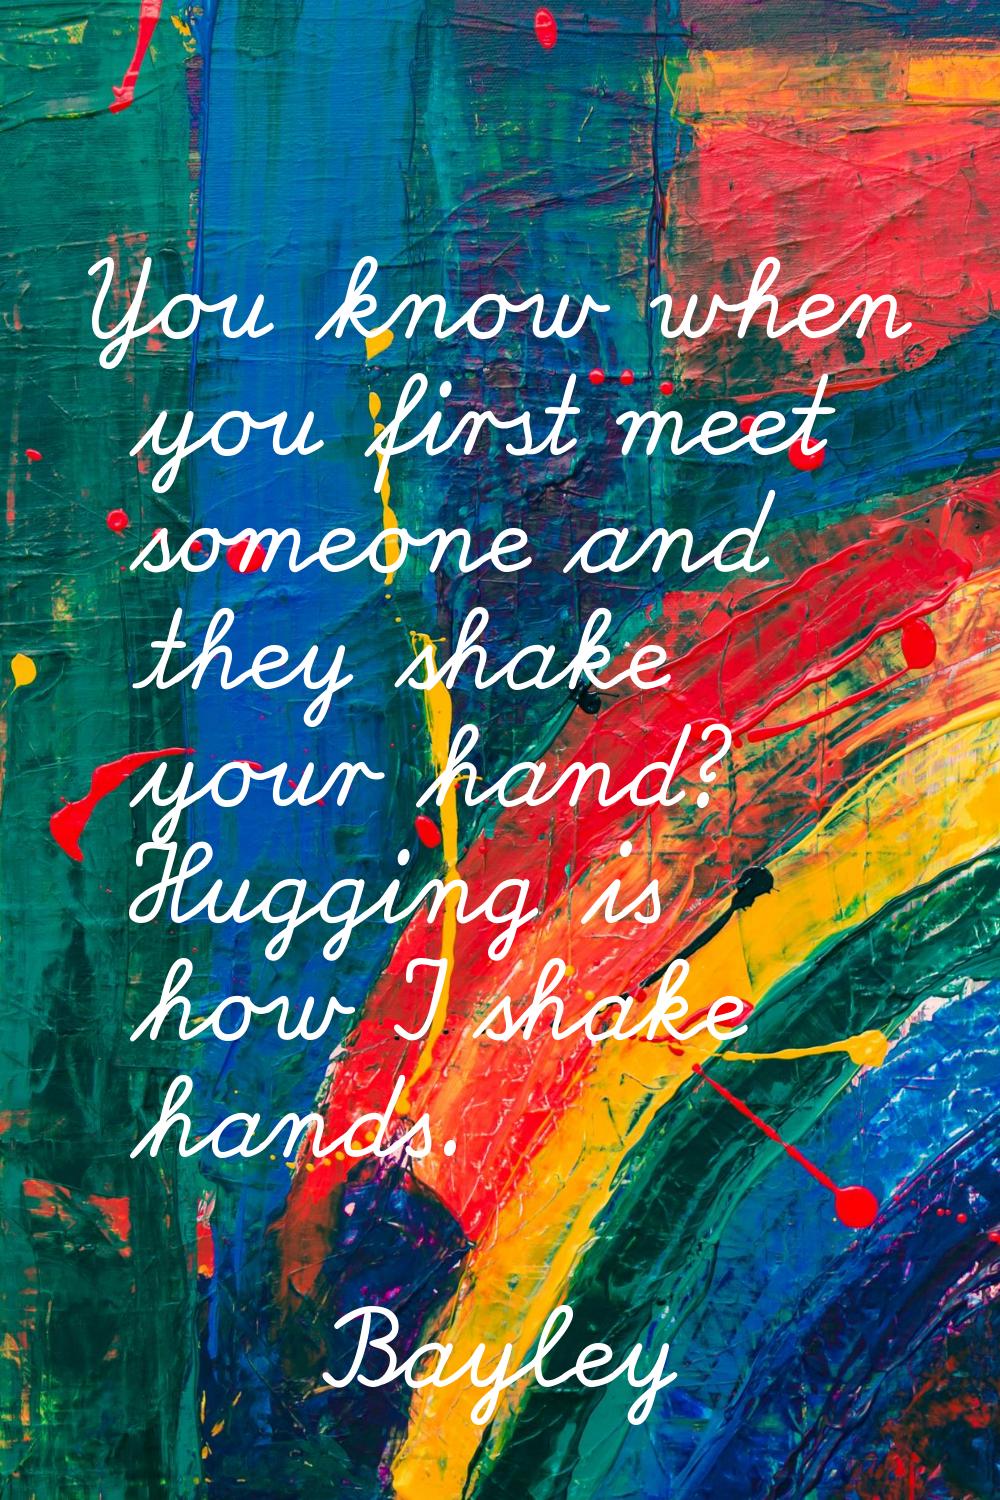 You know when you first meet someone and they shake your hand? Hugging is how I shake hands.